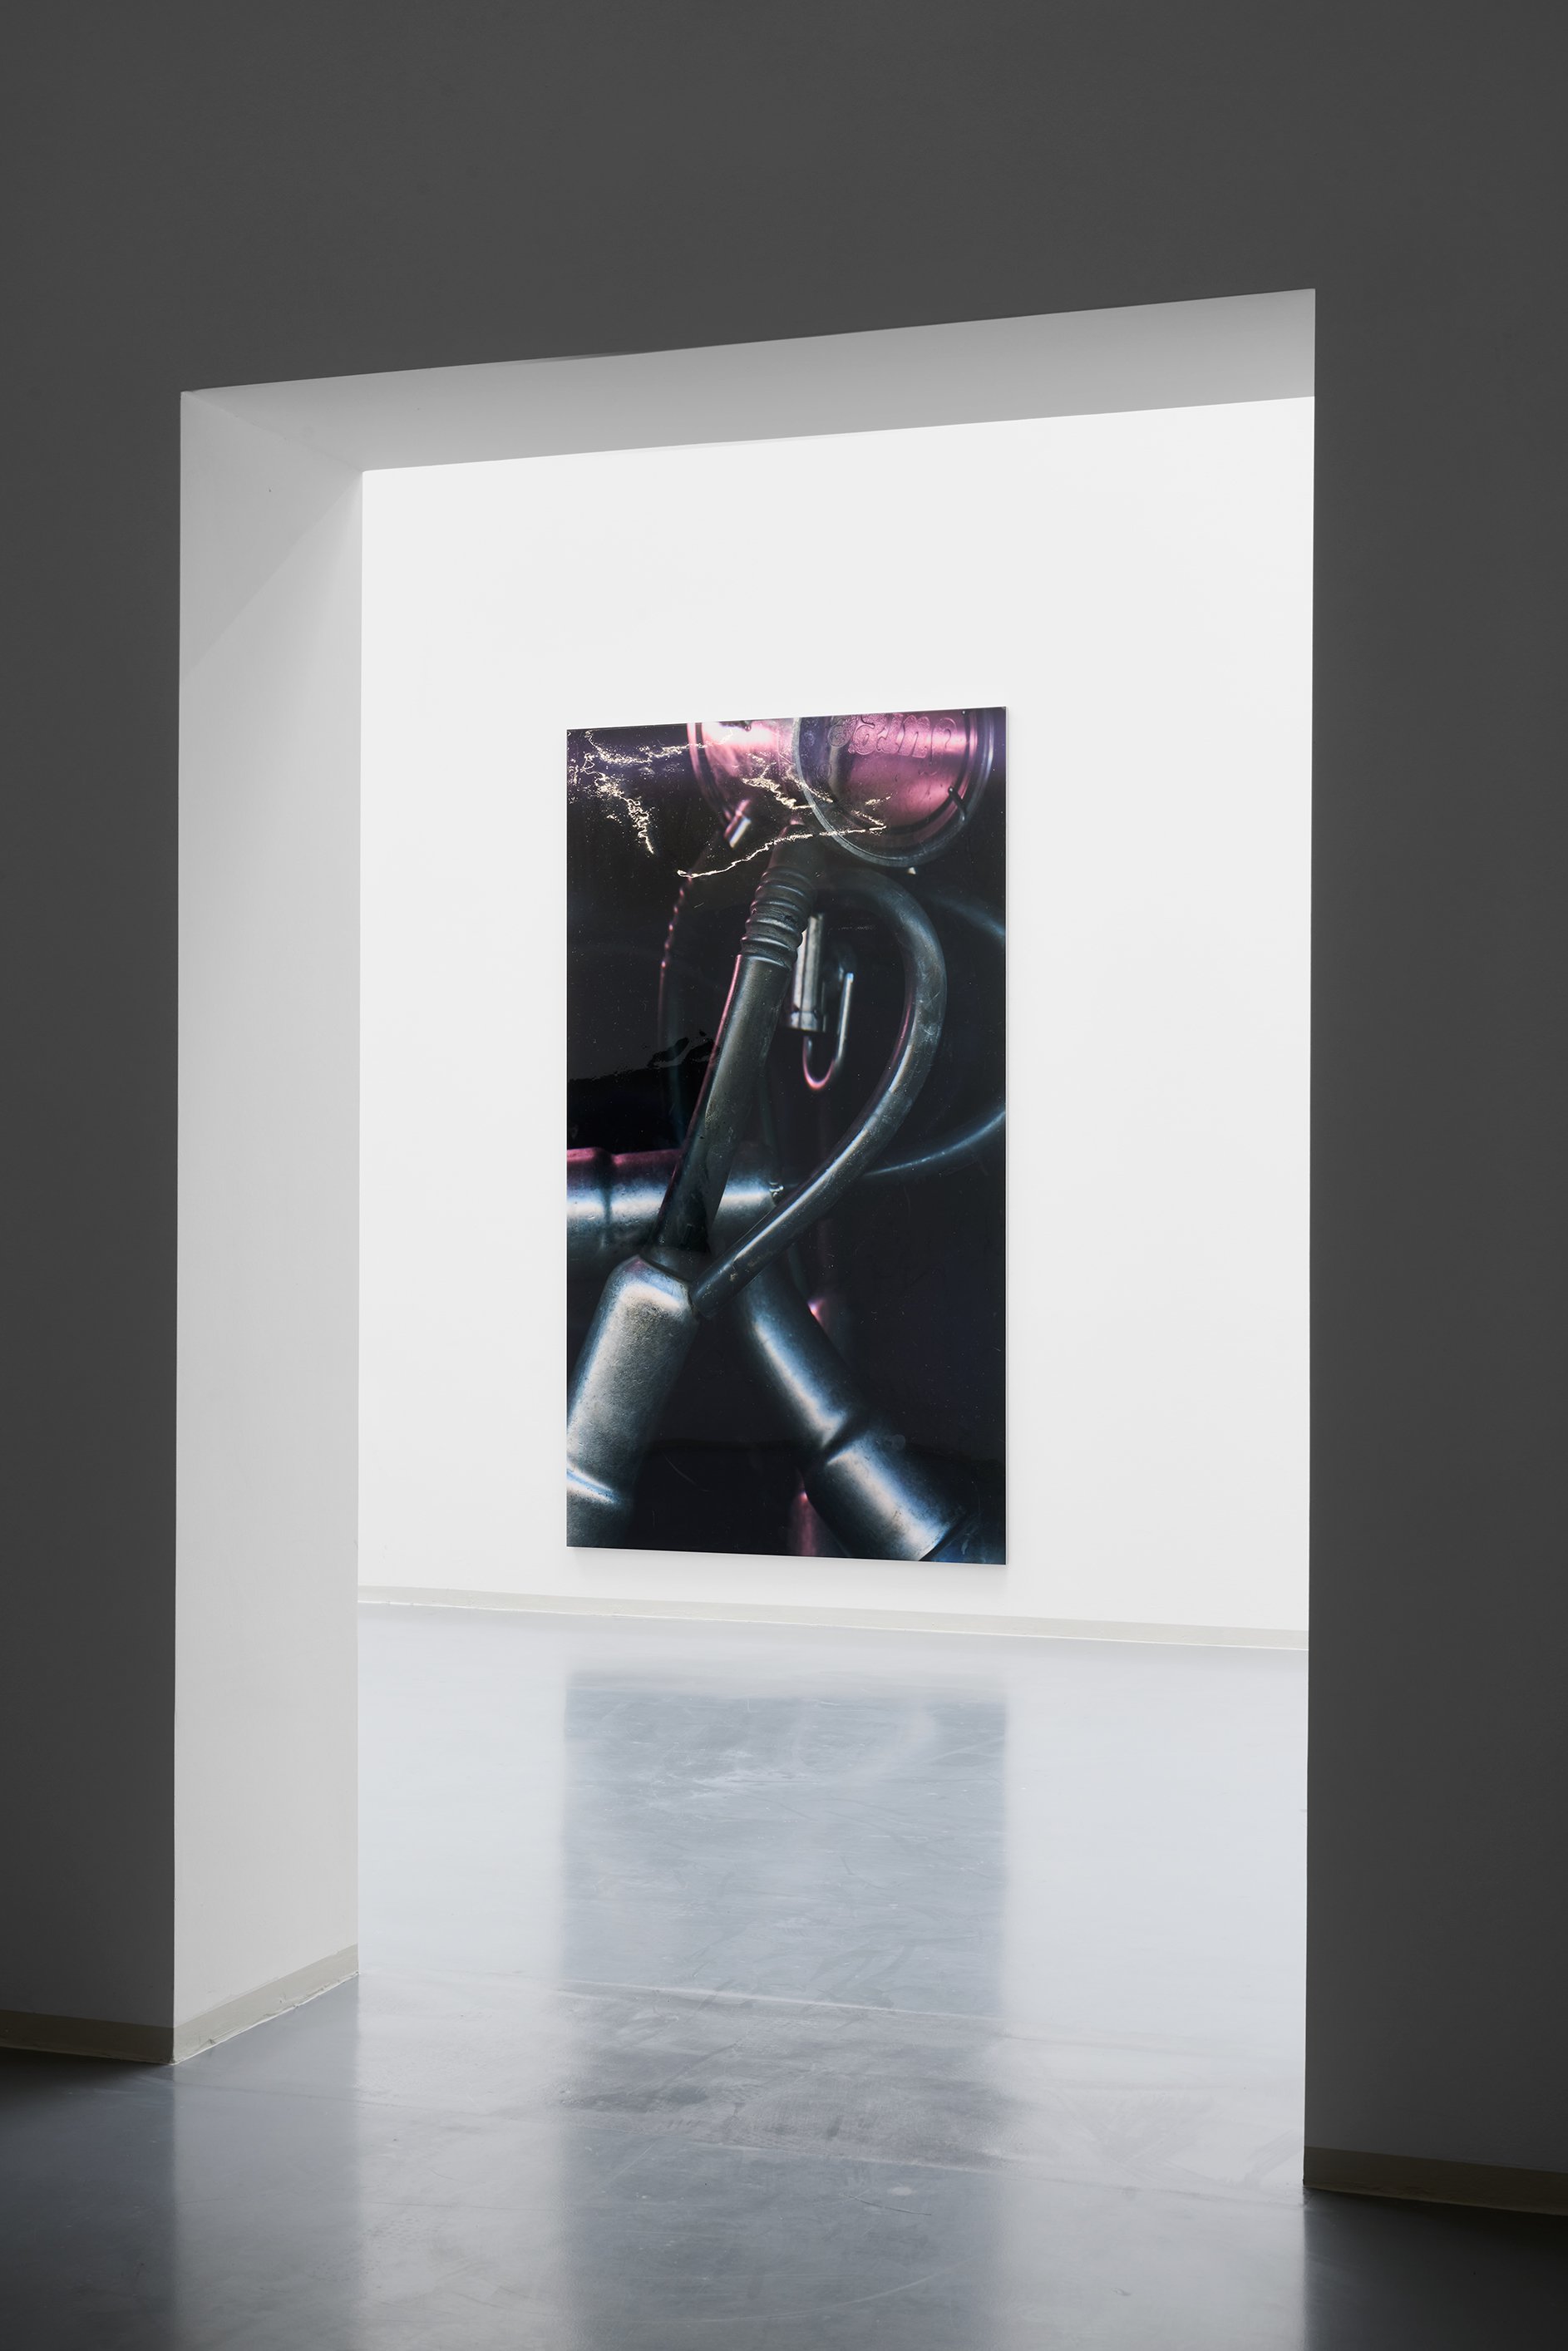 Lucie Stahl, Surge, installation view, Lucie Stahl: Seven Sisters, Bonner Kunstverein, 2022. Courtesy the artist, Cabinet Gallery, London, dépendance, Brussels, Fitzpatrick Gallery, Paris and Los Angeles, and Galerie Meyer Kainer, Vienna. Photo: Mareike Tocha.